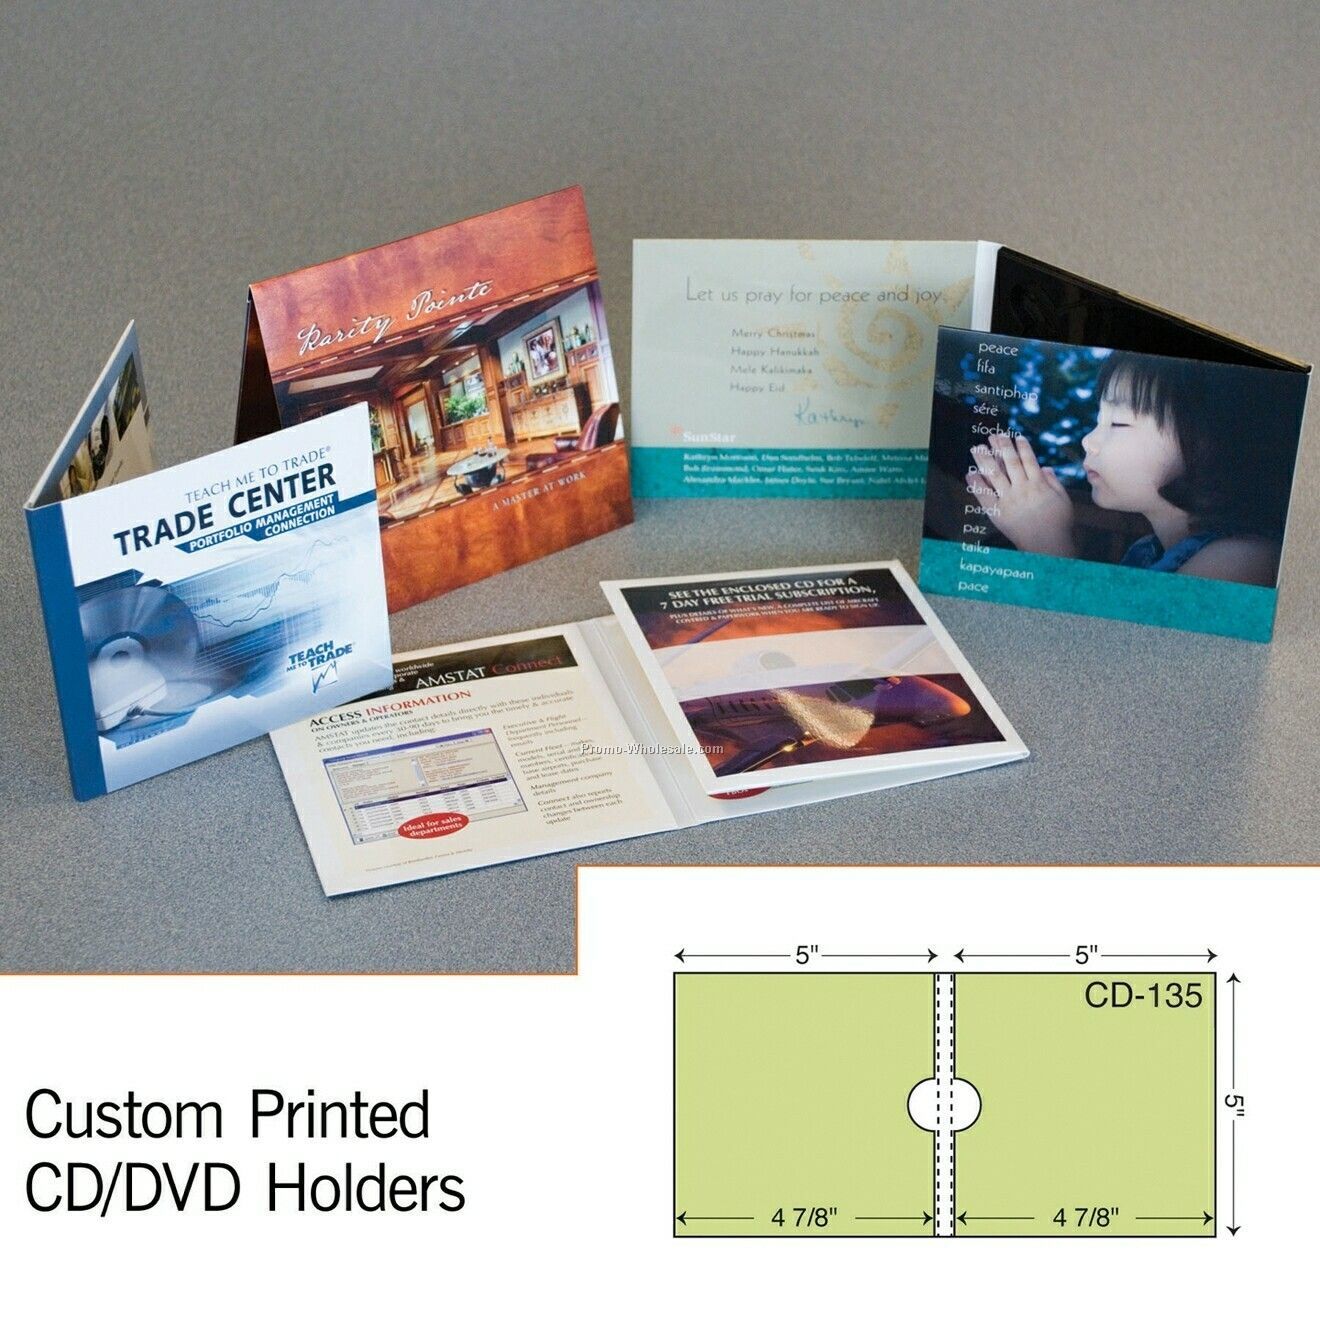 5"x5" Double CD Sleeve W/ 1/4" Spine (1 Color)